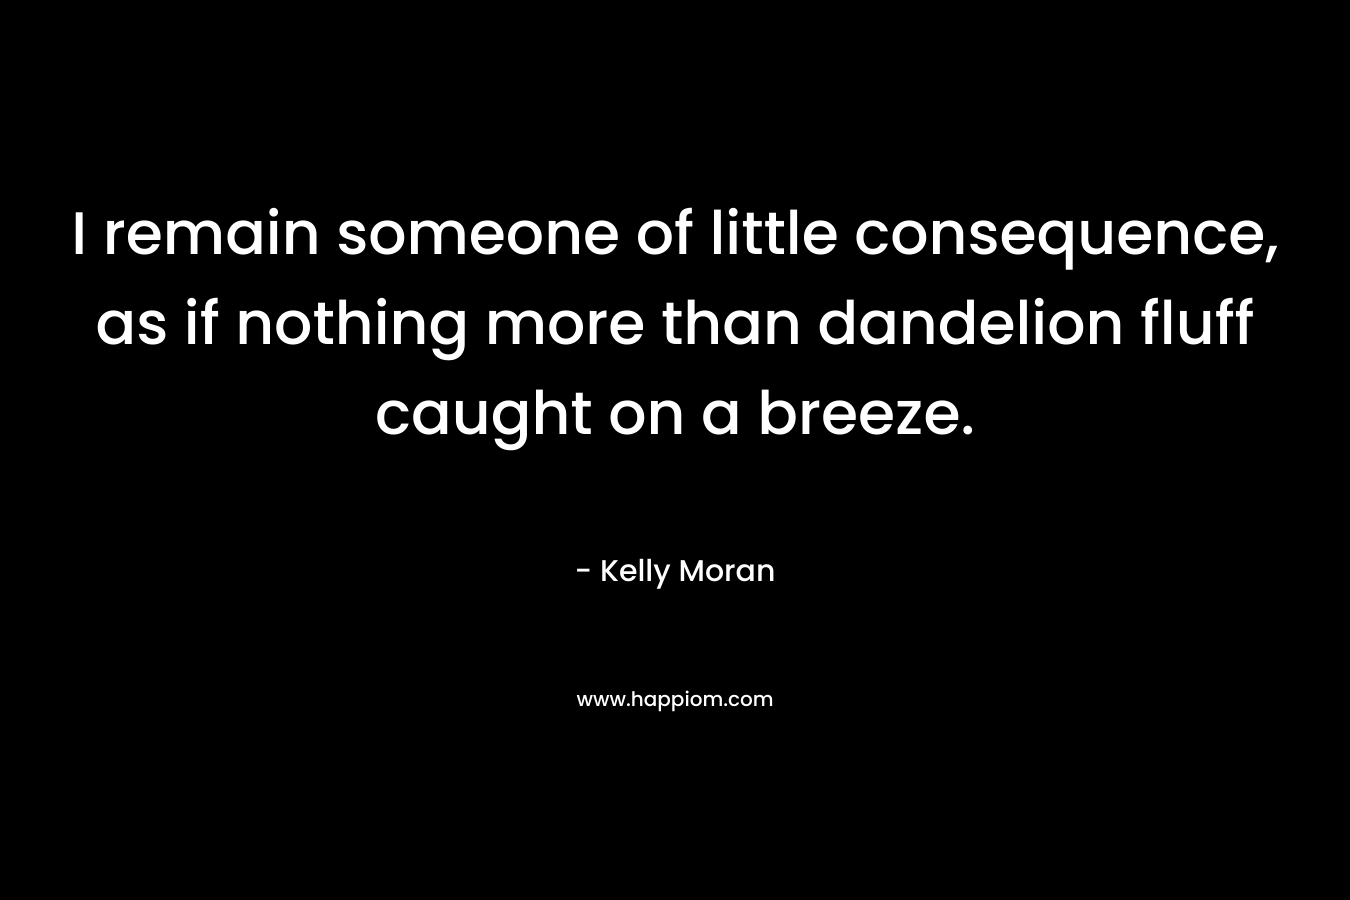 I remain someone of little consequence, as if nothing more than dandelion fluff caught on a breeze.